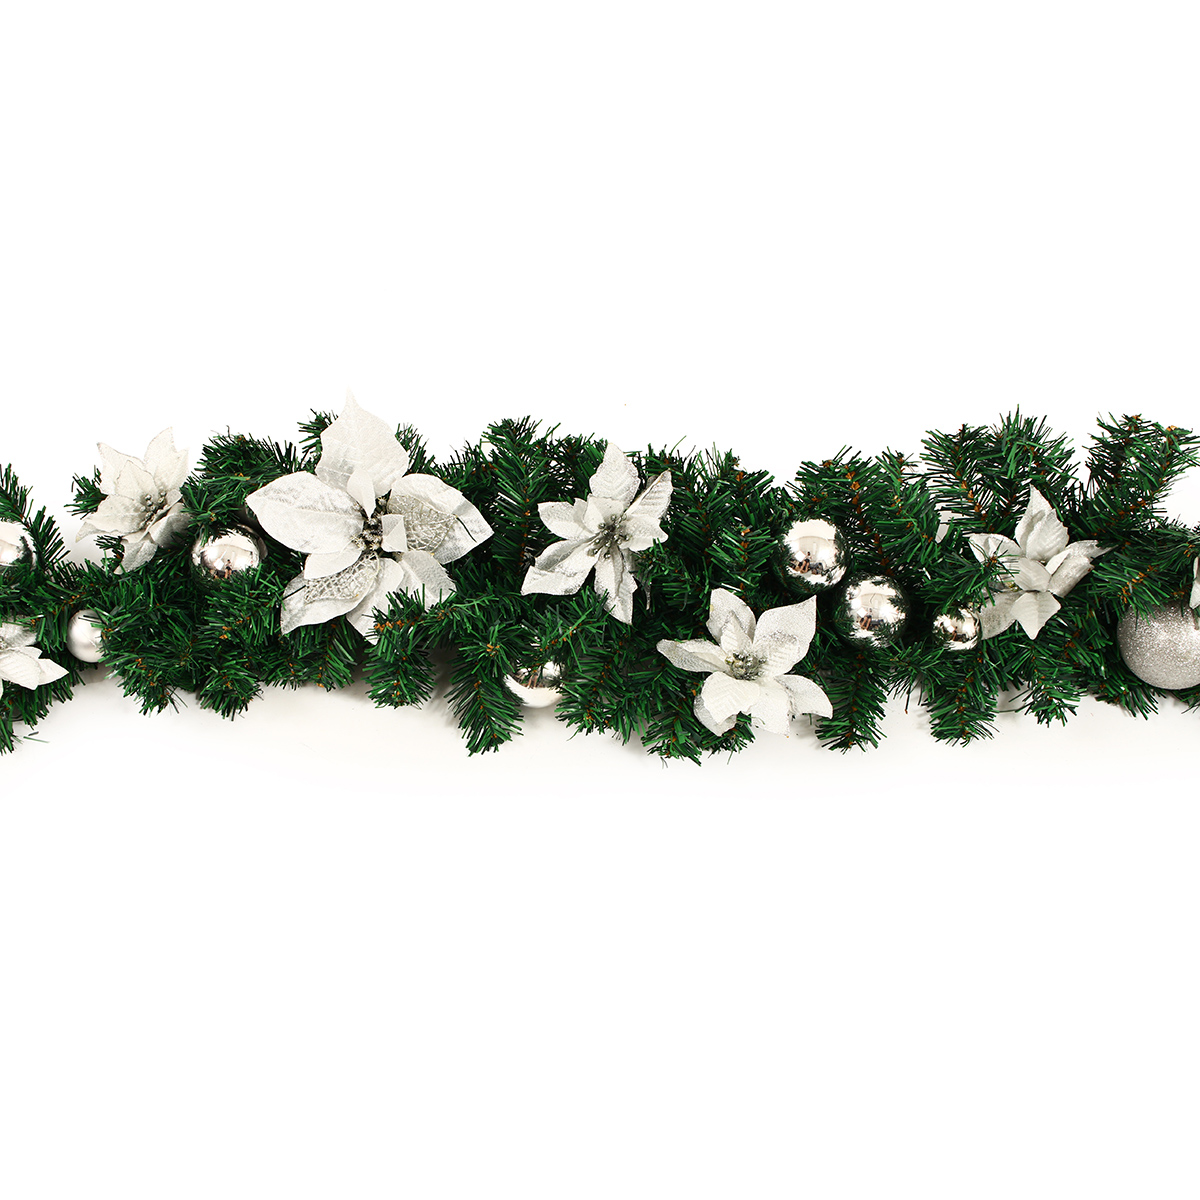 27M-Christmas-Garland-Party-Atificial-Rattan-Bow-Home-Wall-Ornament-Decorations-1363206-4